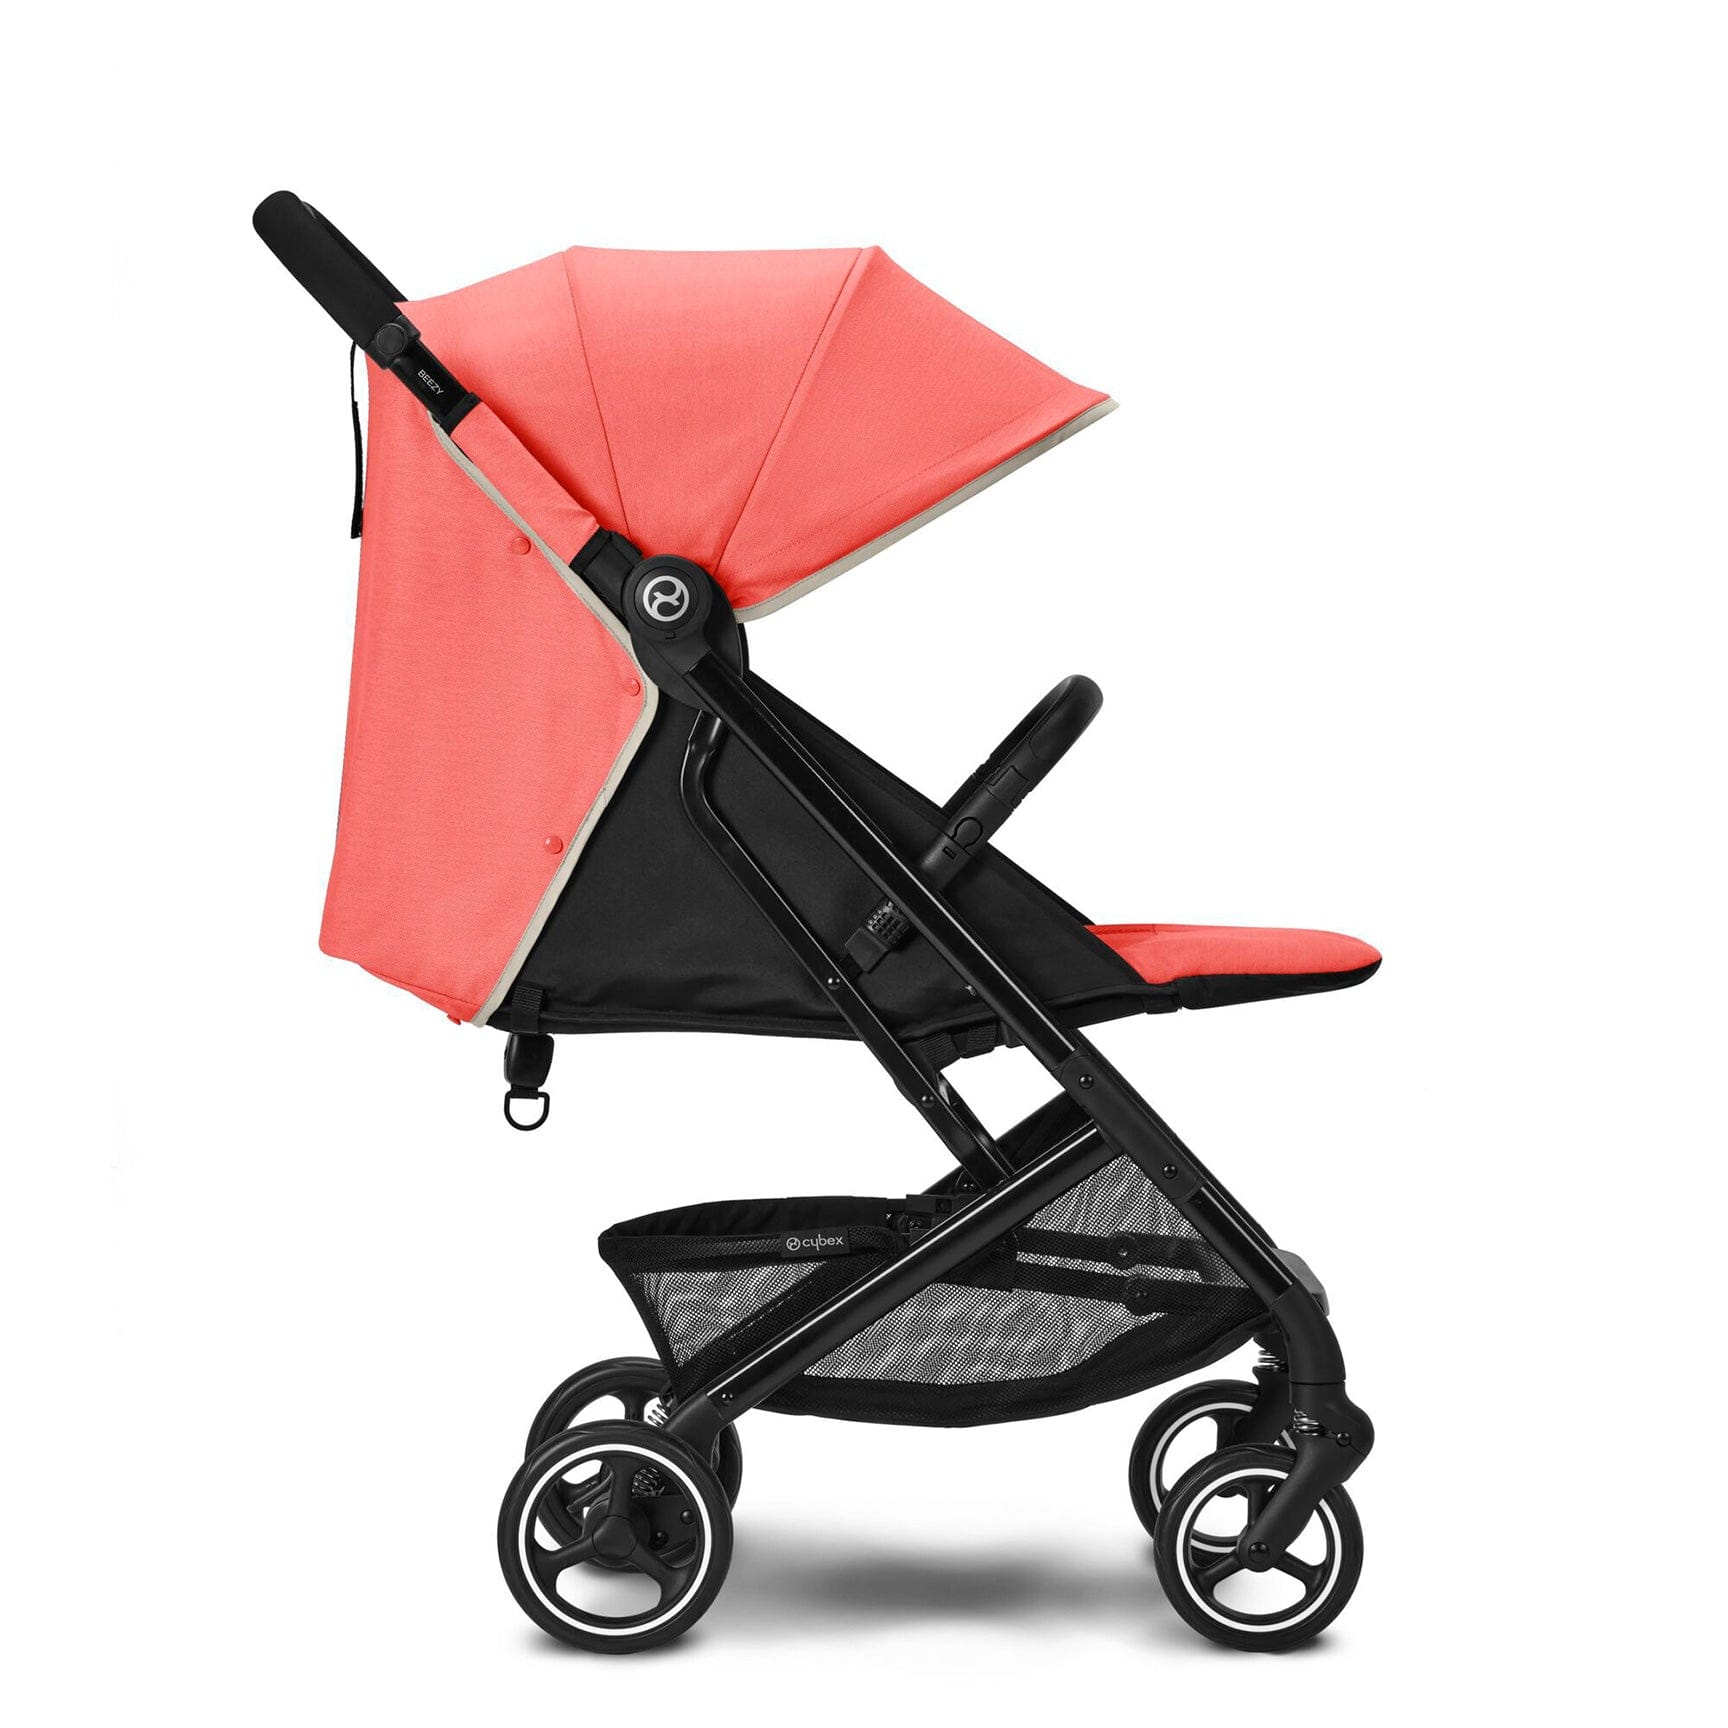 Cybex Beezy in Hibiscus Red Pushchairs & Buggies 522001283 4063846277445